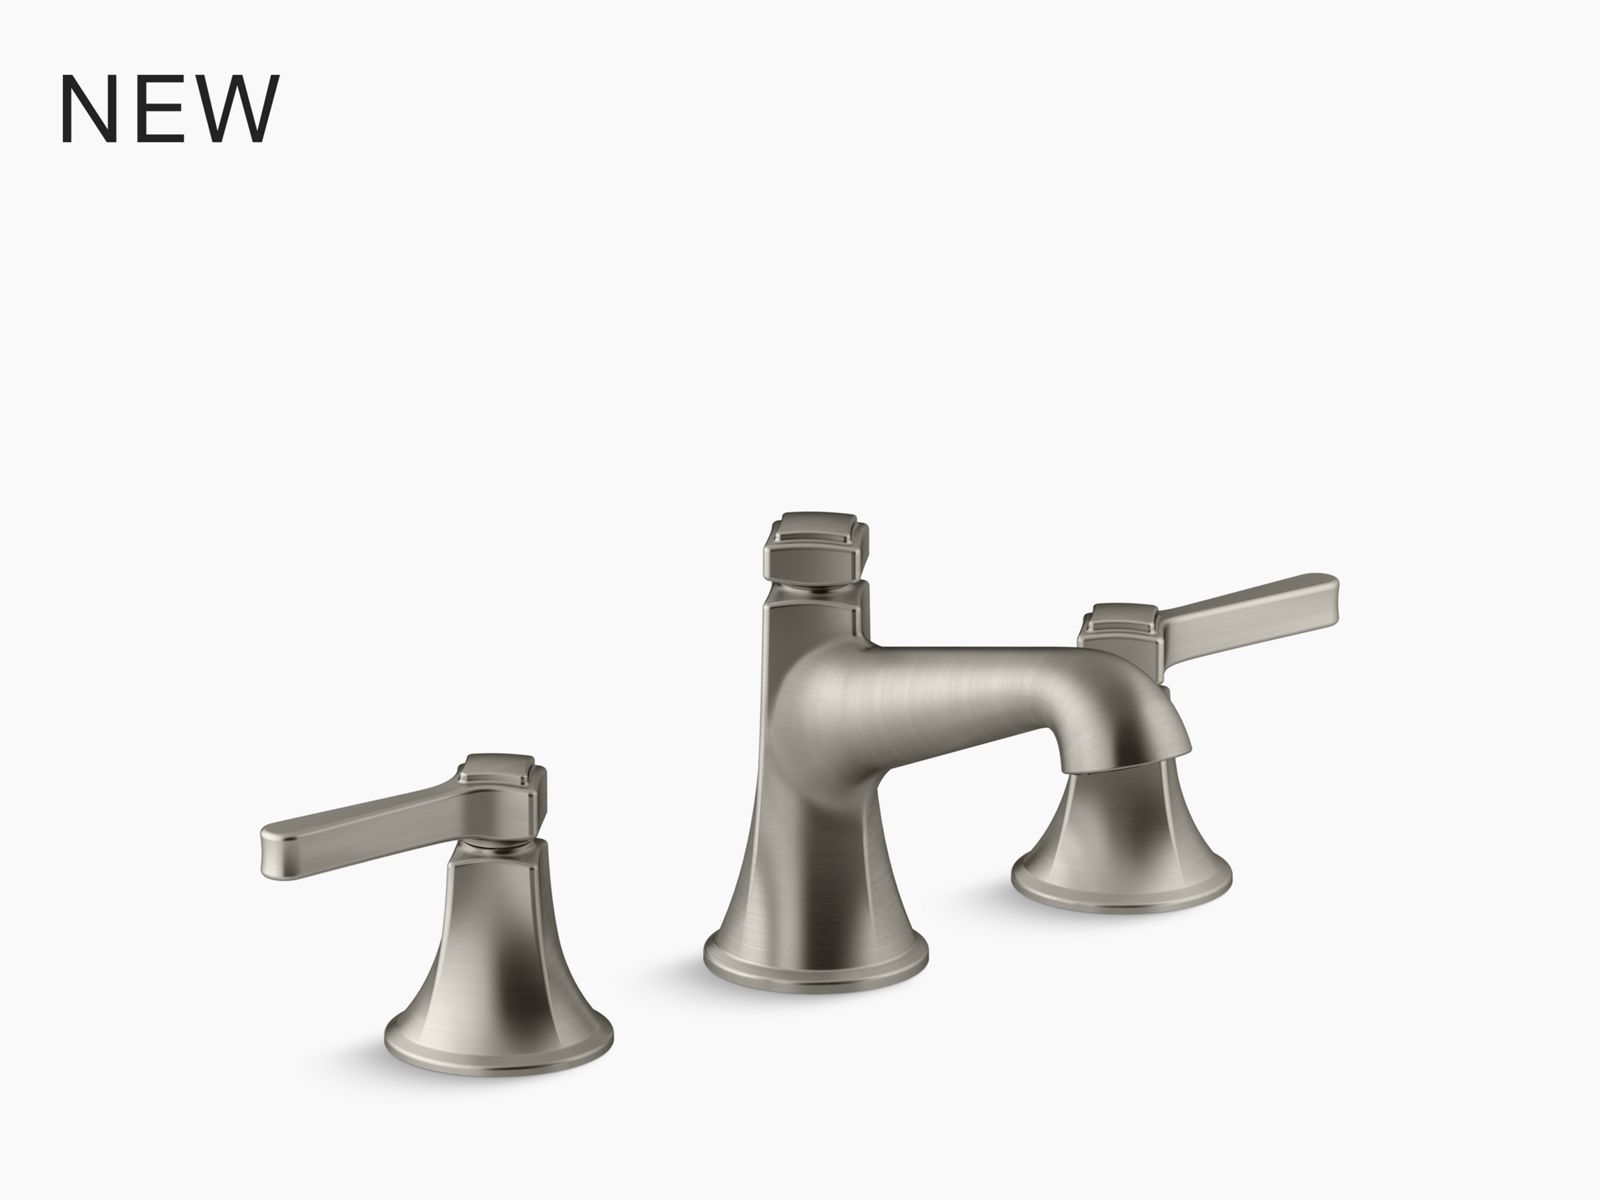 Bathroom faucet with high-arch spout and aerator